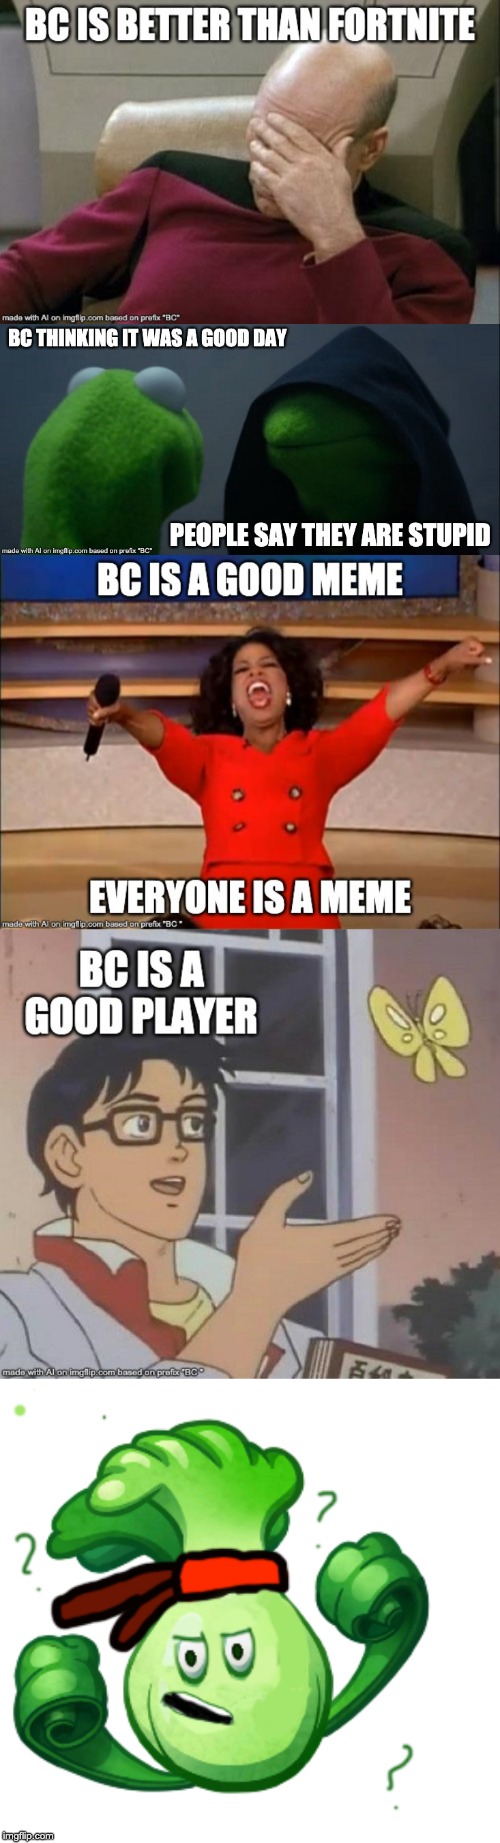 here are some AI generated memes of BC | made w/ Imgflip meme maker